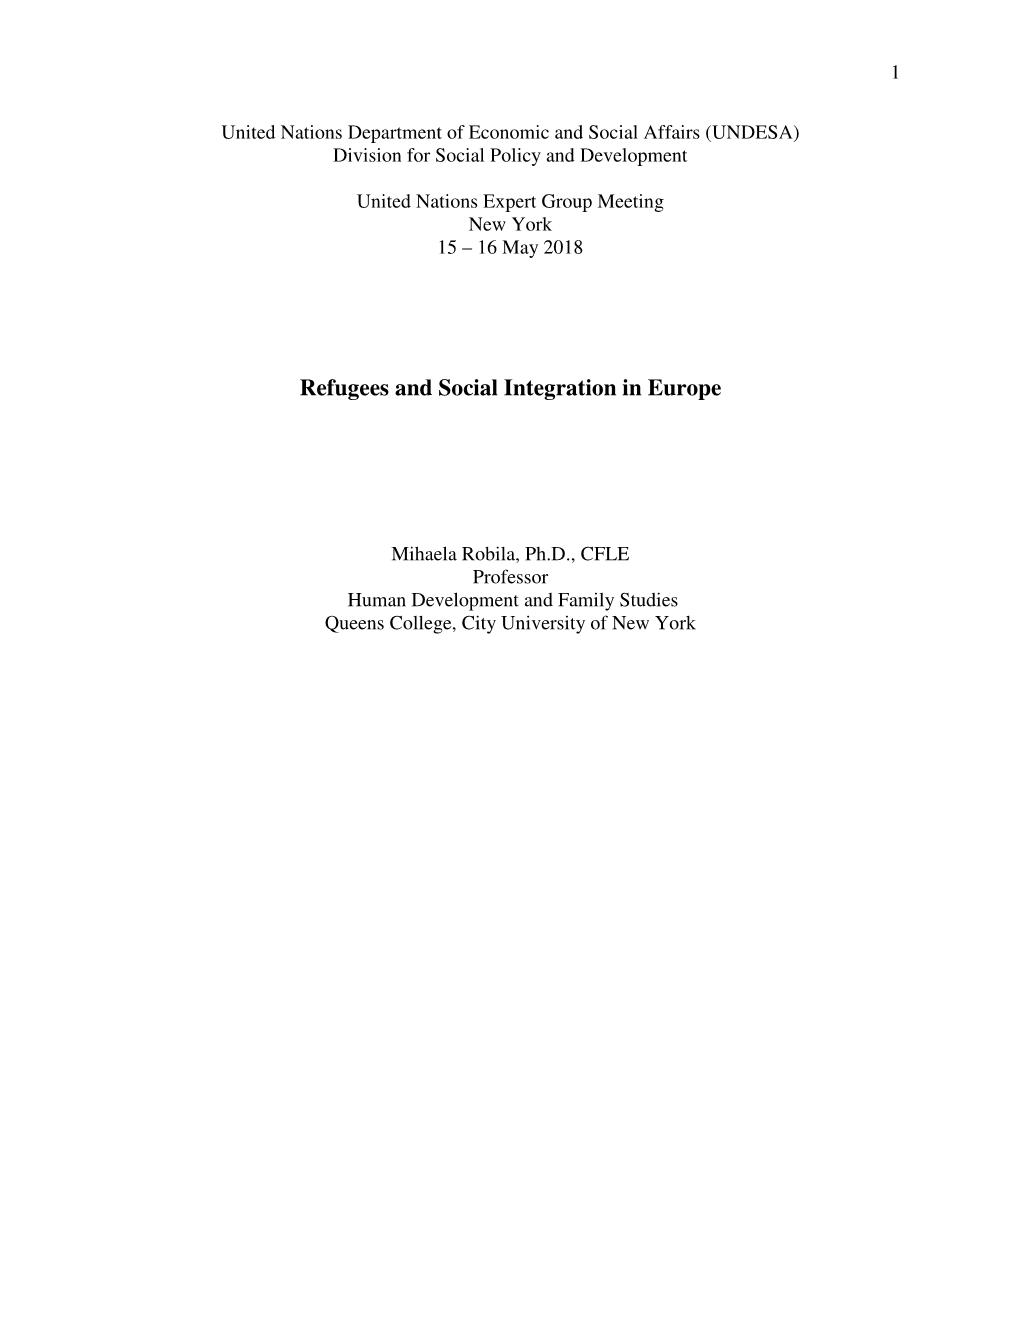 Refugees and Social Integration in Europe